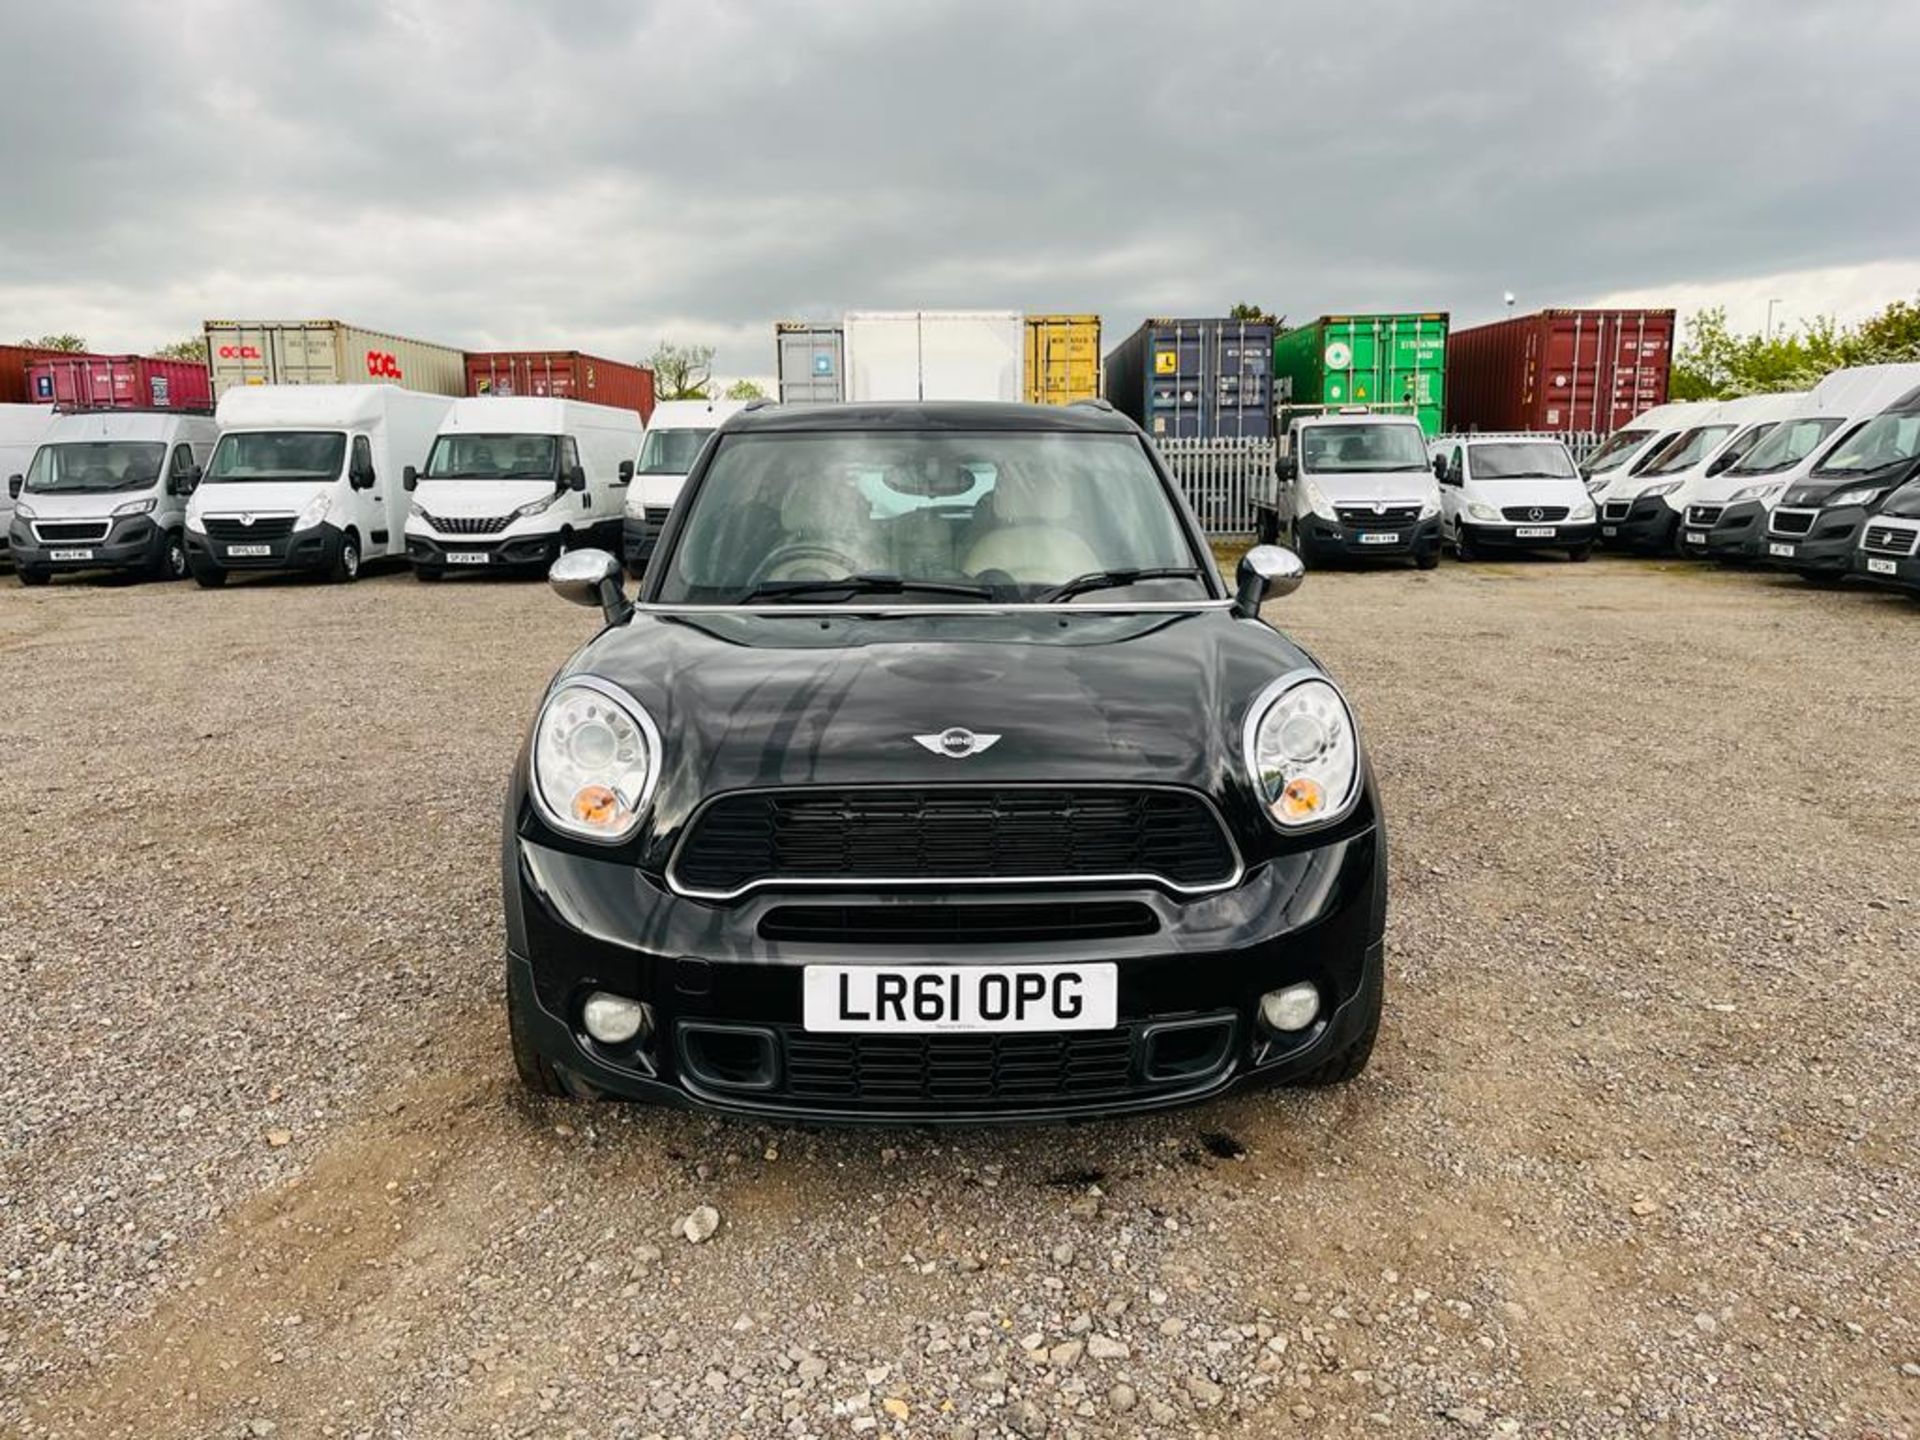 **ON SALE** Mini Cooper Countryman All4 SD 2.0 2011 "61 Reg" - Start/Stop - Alloy Wheels -Navigation - Image 2 of 25